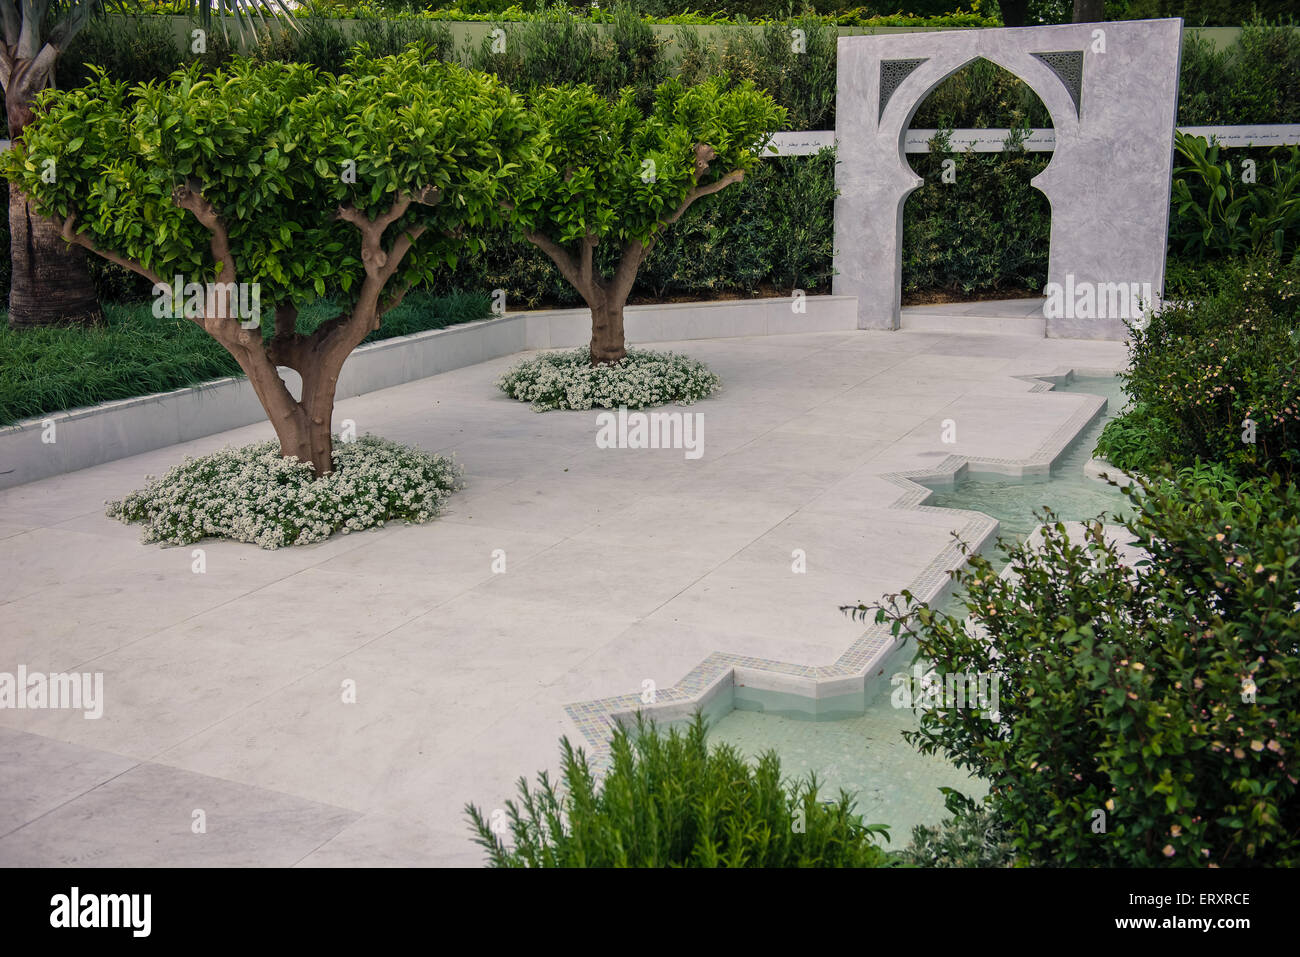 the beauty of islam garden at the chelsea flower show 2015 stock